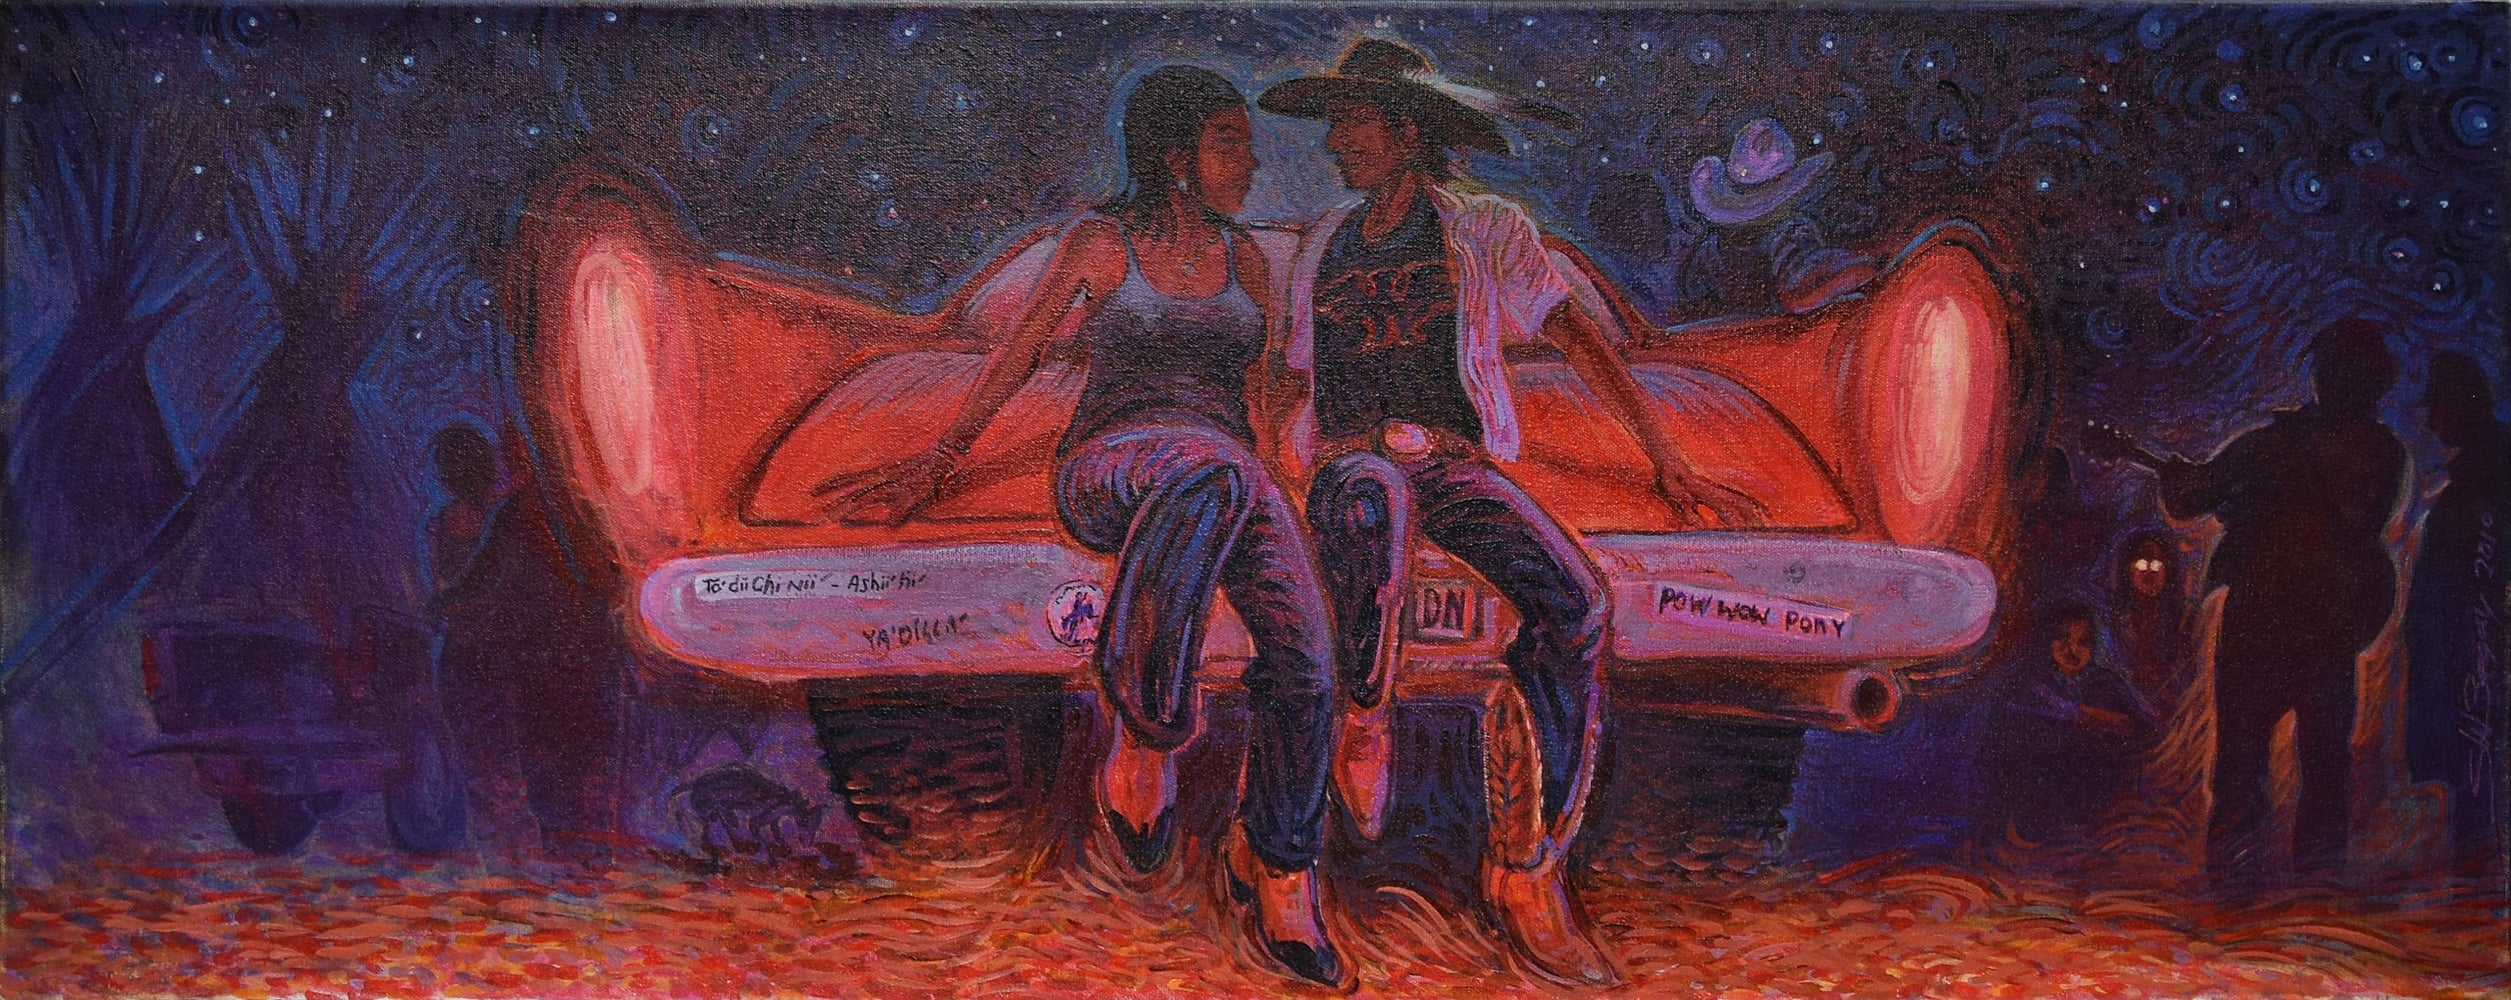 Shonto Begay - Pow-wow After Glow (Hearts Glow, on the Edge of Rainbow)